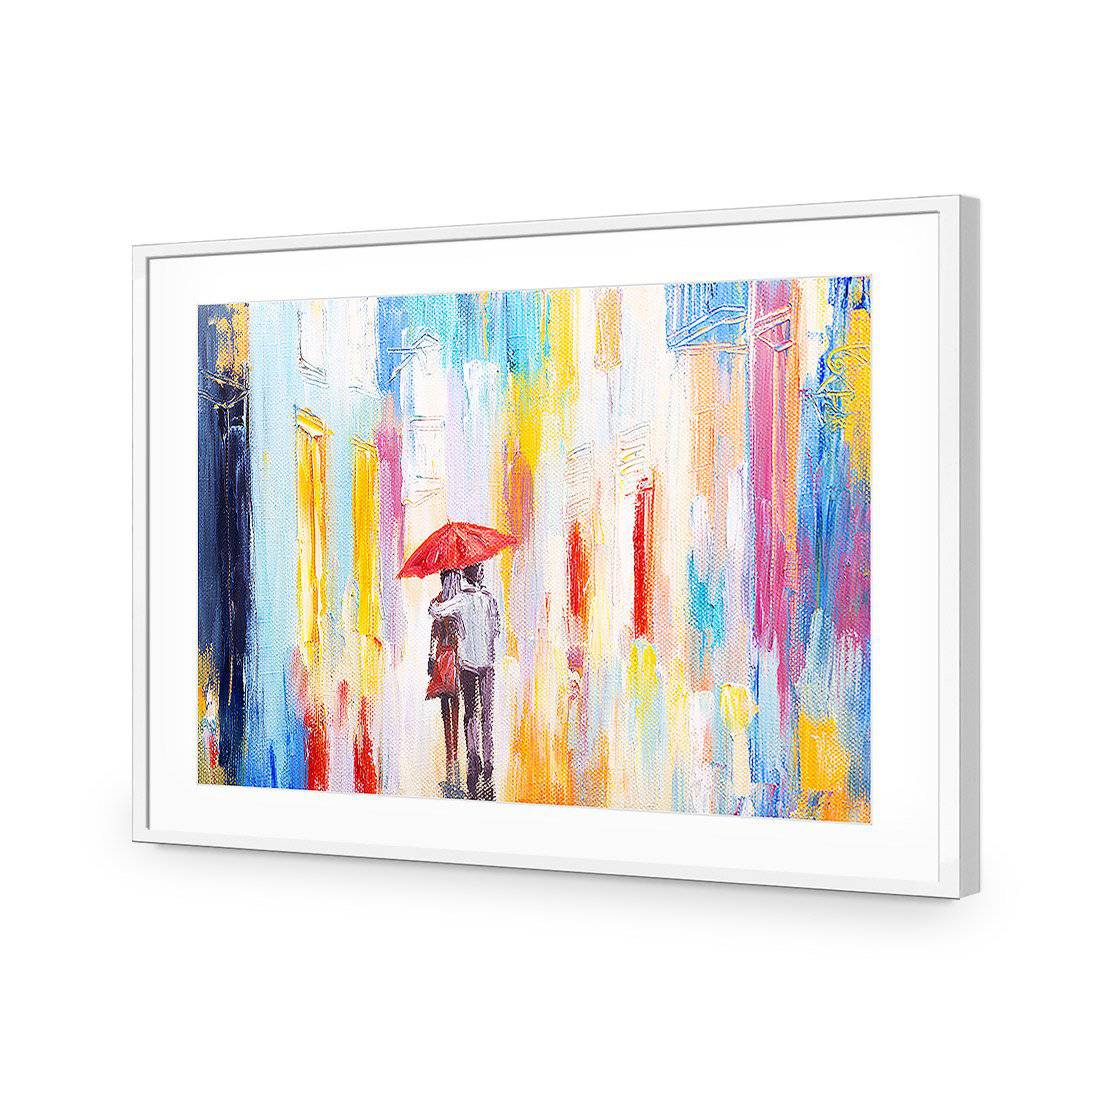 Heading Home-Acrylic-Wall Art Design-With Border-Acrylic - White Frame-45x30cm-Wall Art Designs